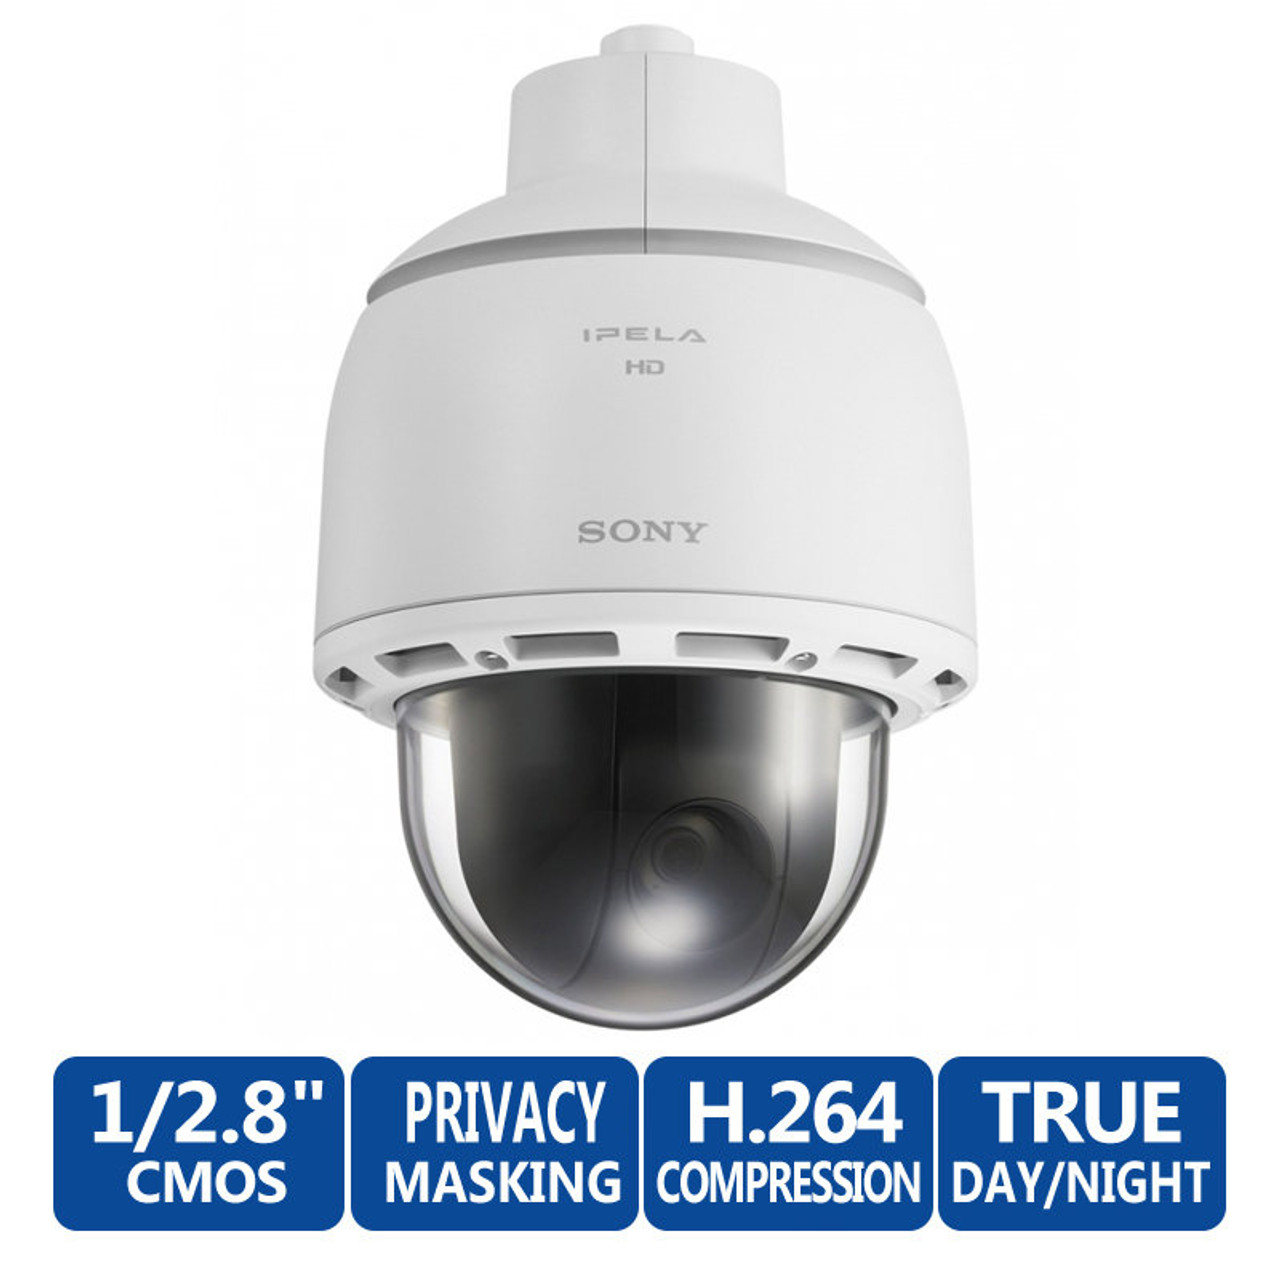 sony dome security camera